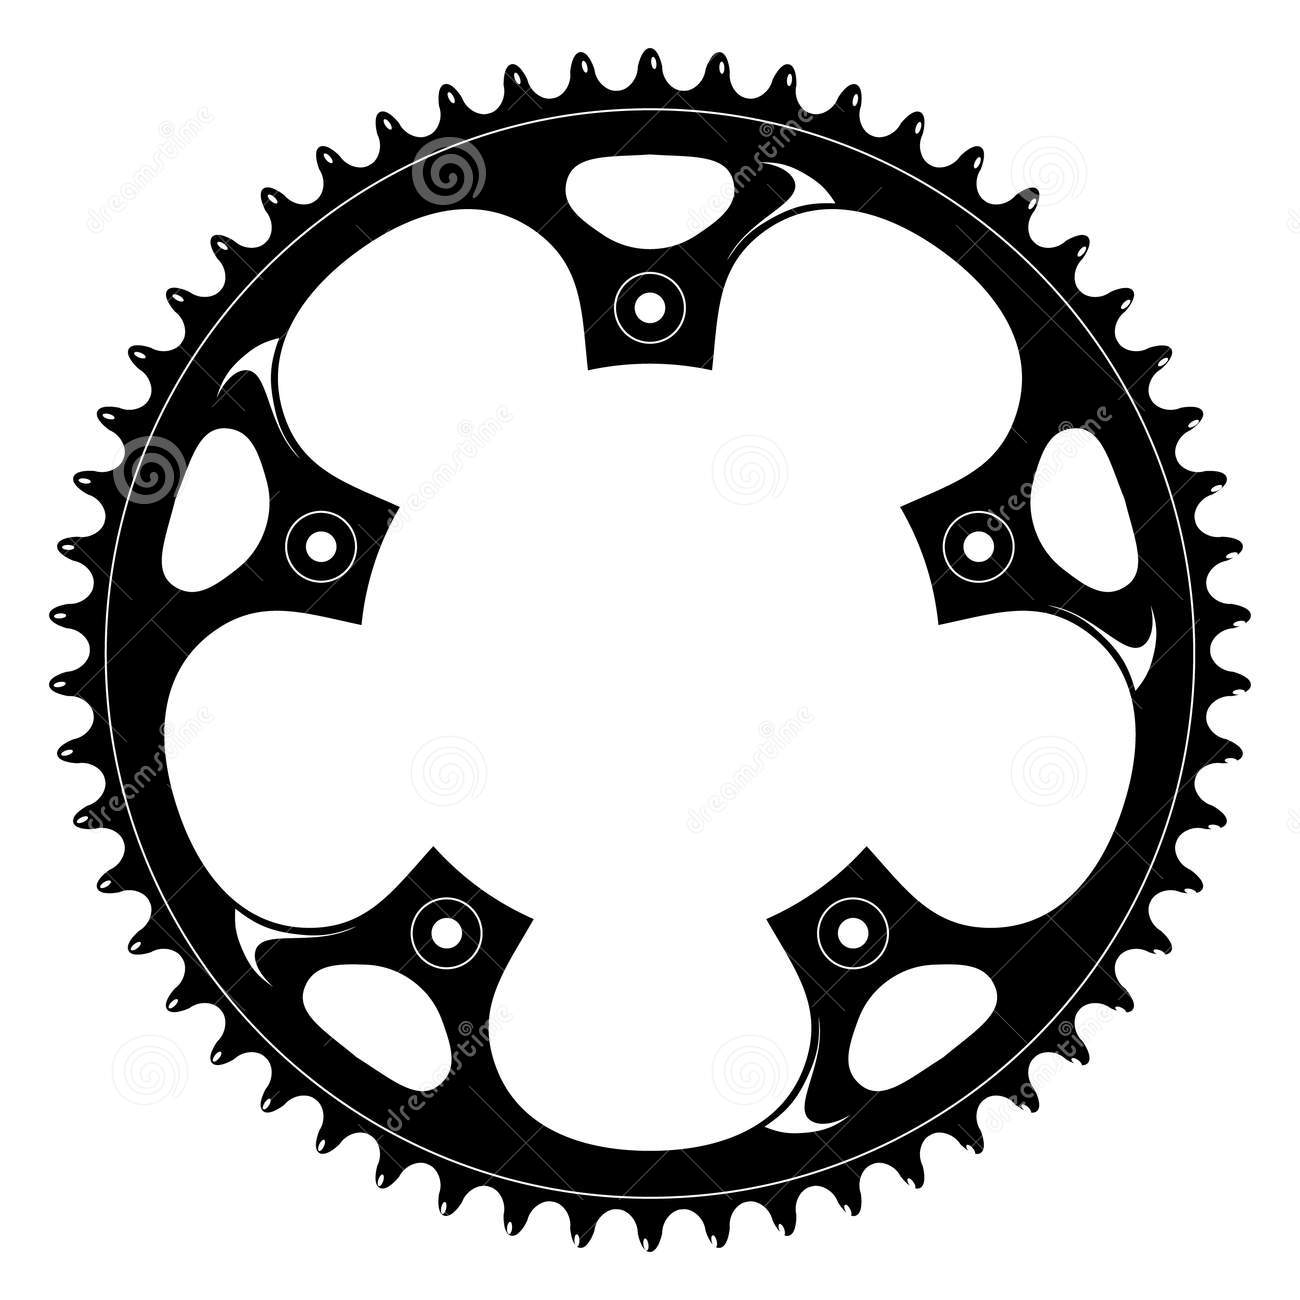 Bicycle crank clipart.